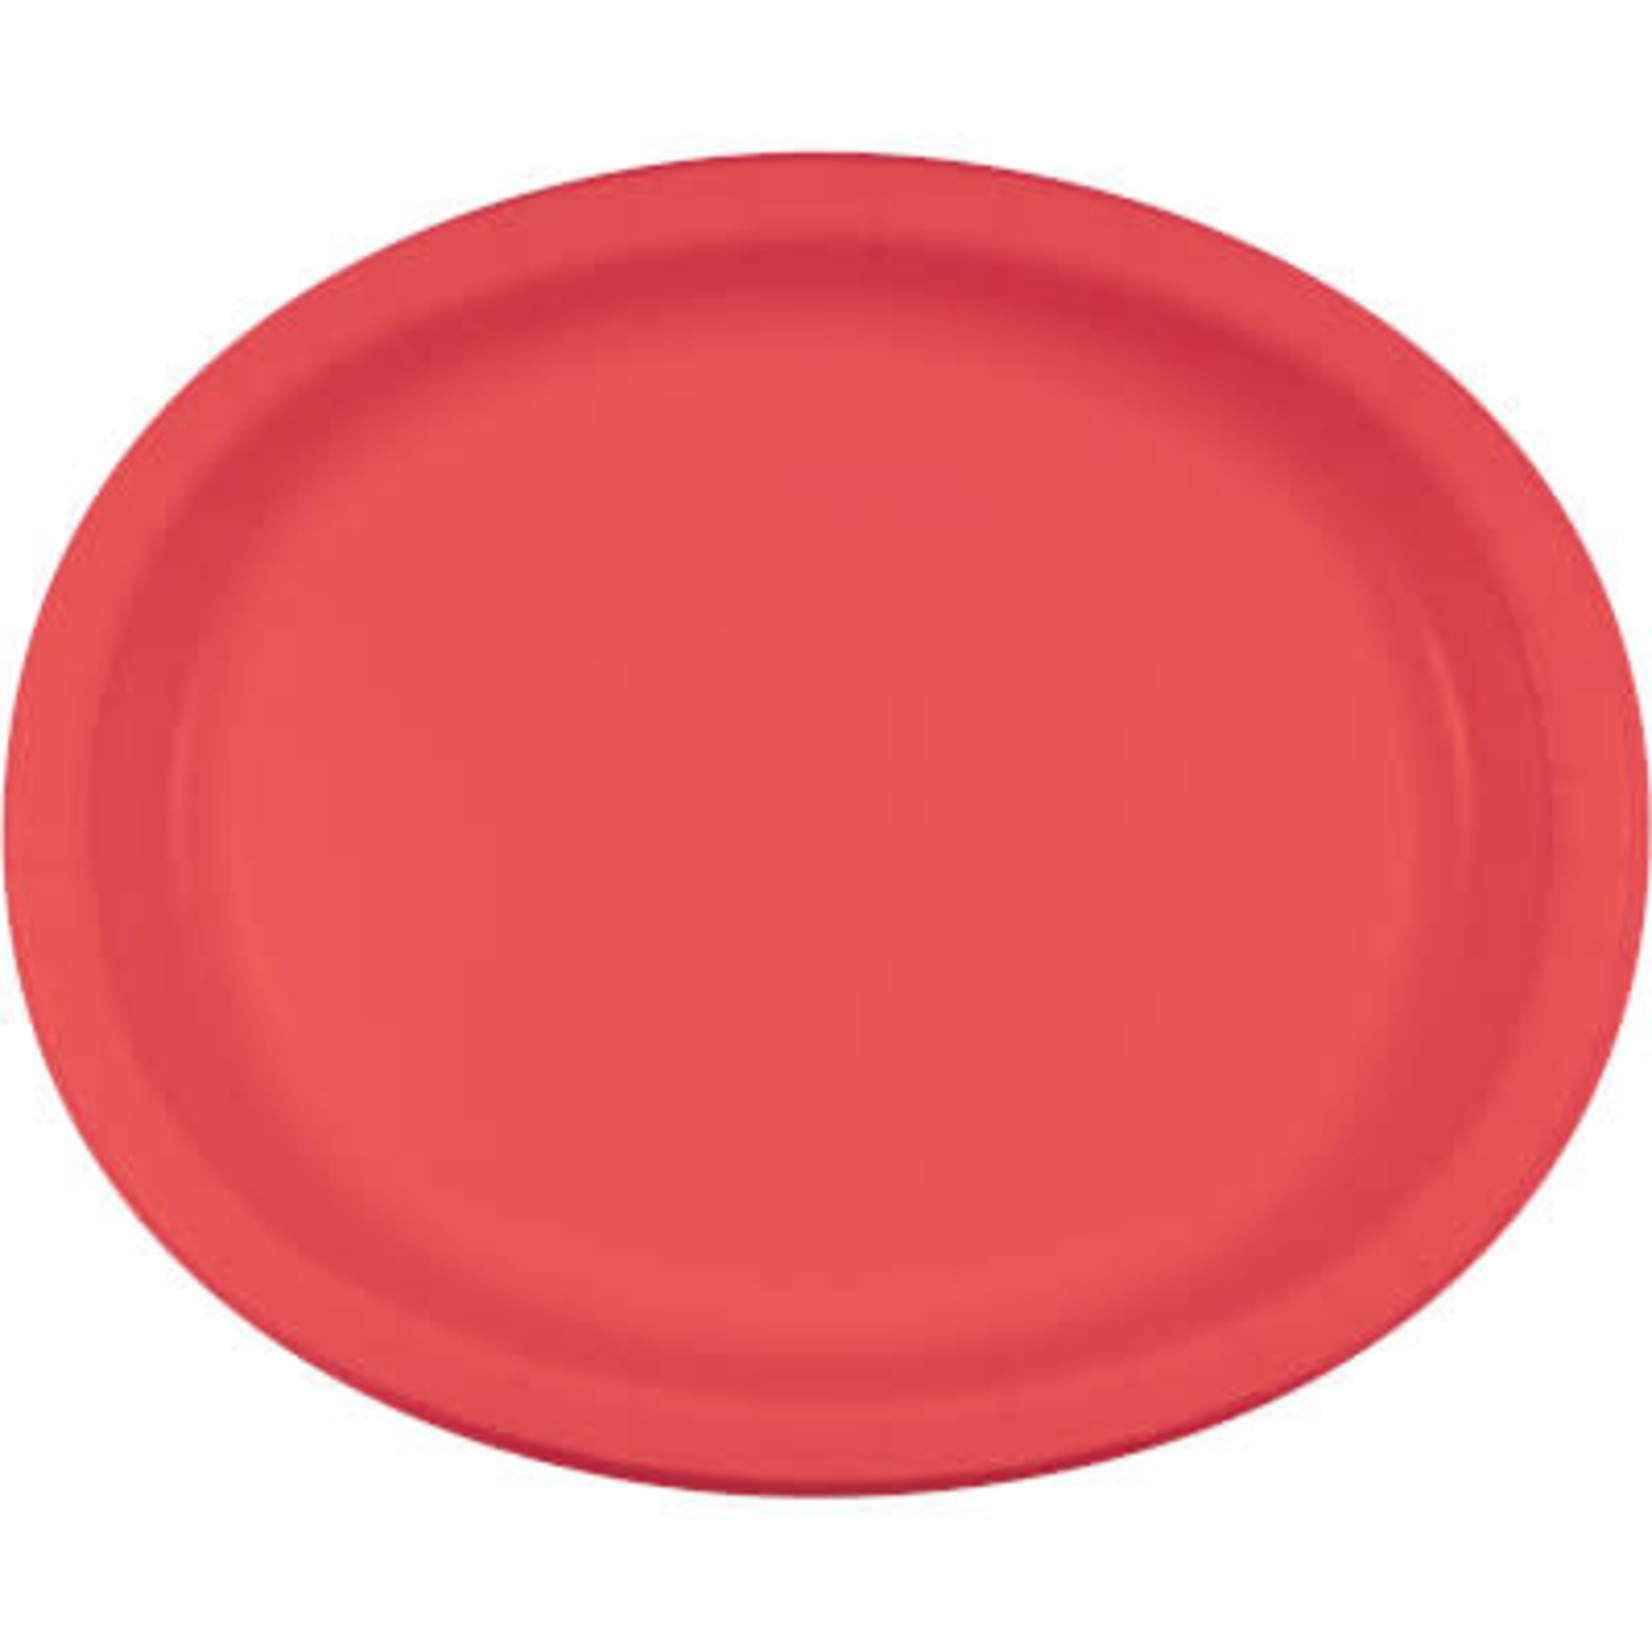 Touch of Color 10" x 12" Coral Oval Paper Plates - 8ct.